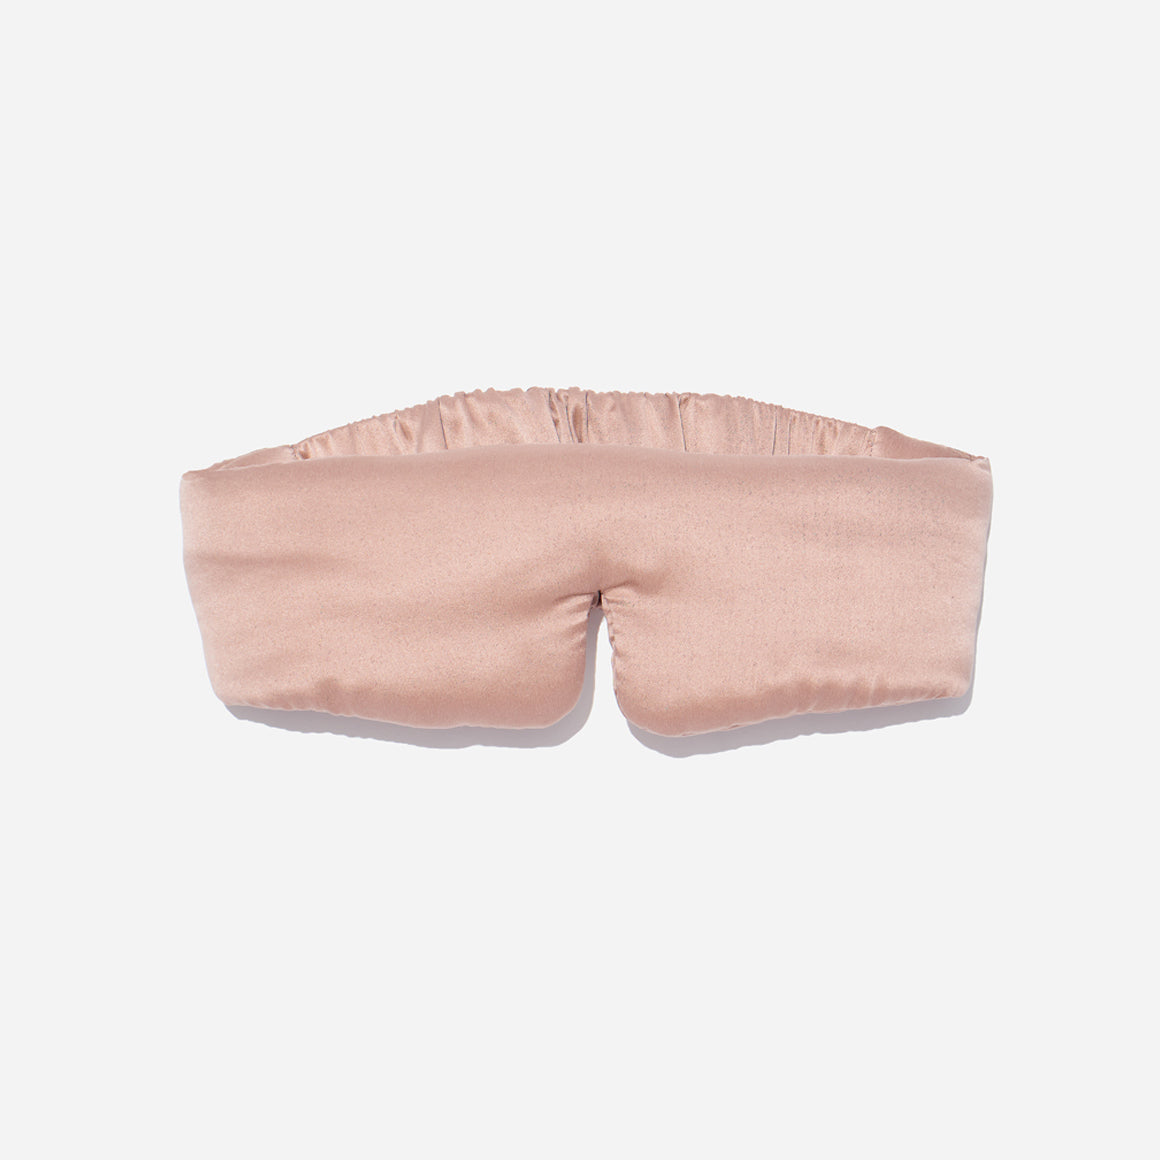 Made from the finest silk, this sleep mask is designed to block out light and provide a comfortable and relaxing sleep environment. The adjustable strap ensures a perfect fit for all head sizes, while the gentle padding around the eye area ensures that the mask doesn't put any pressure on your eyes.